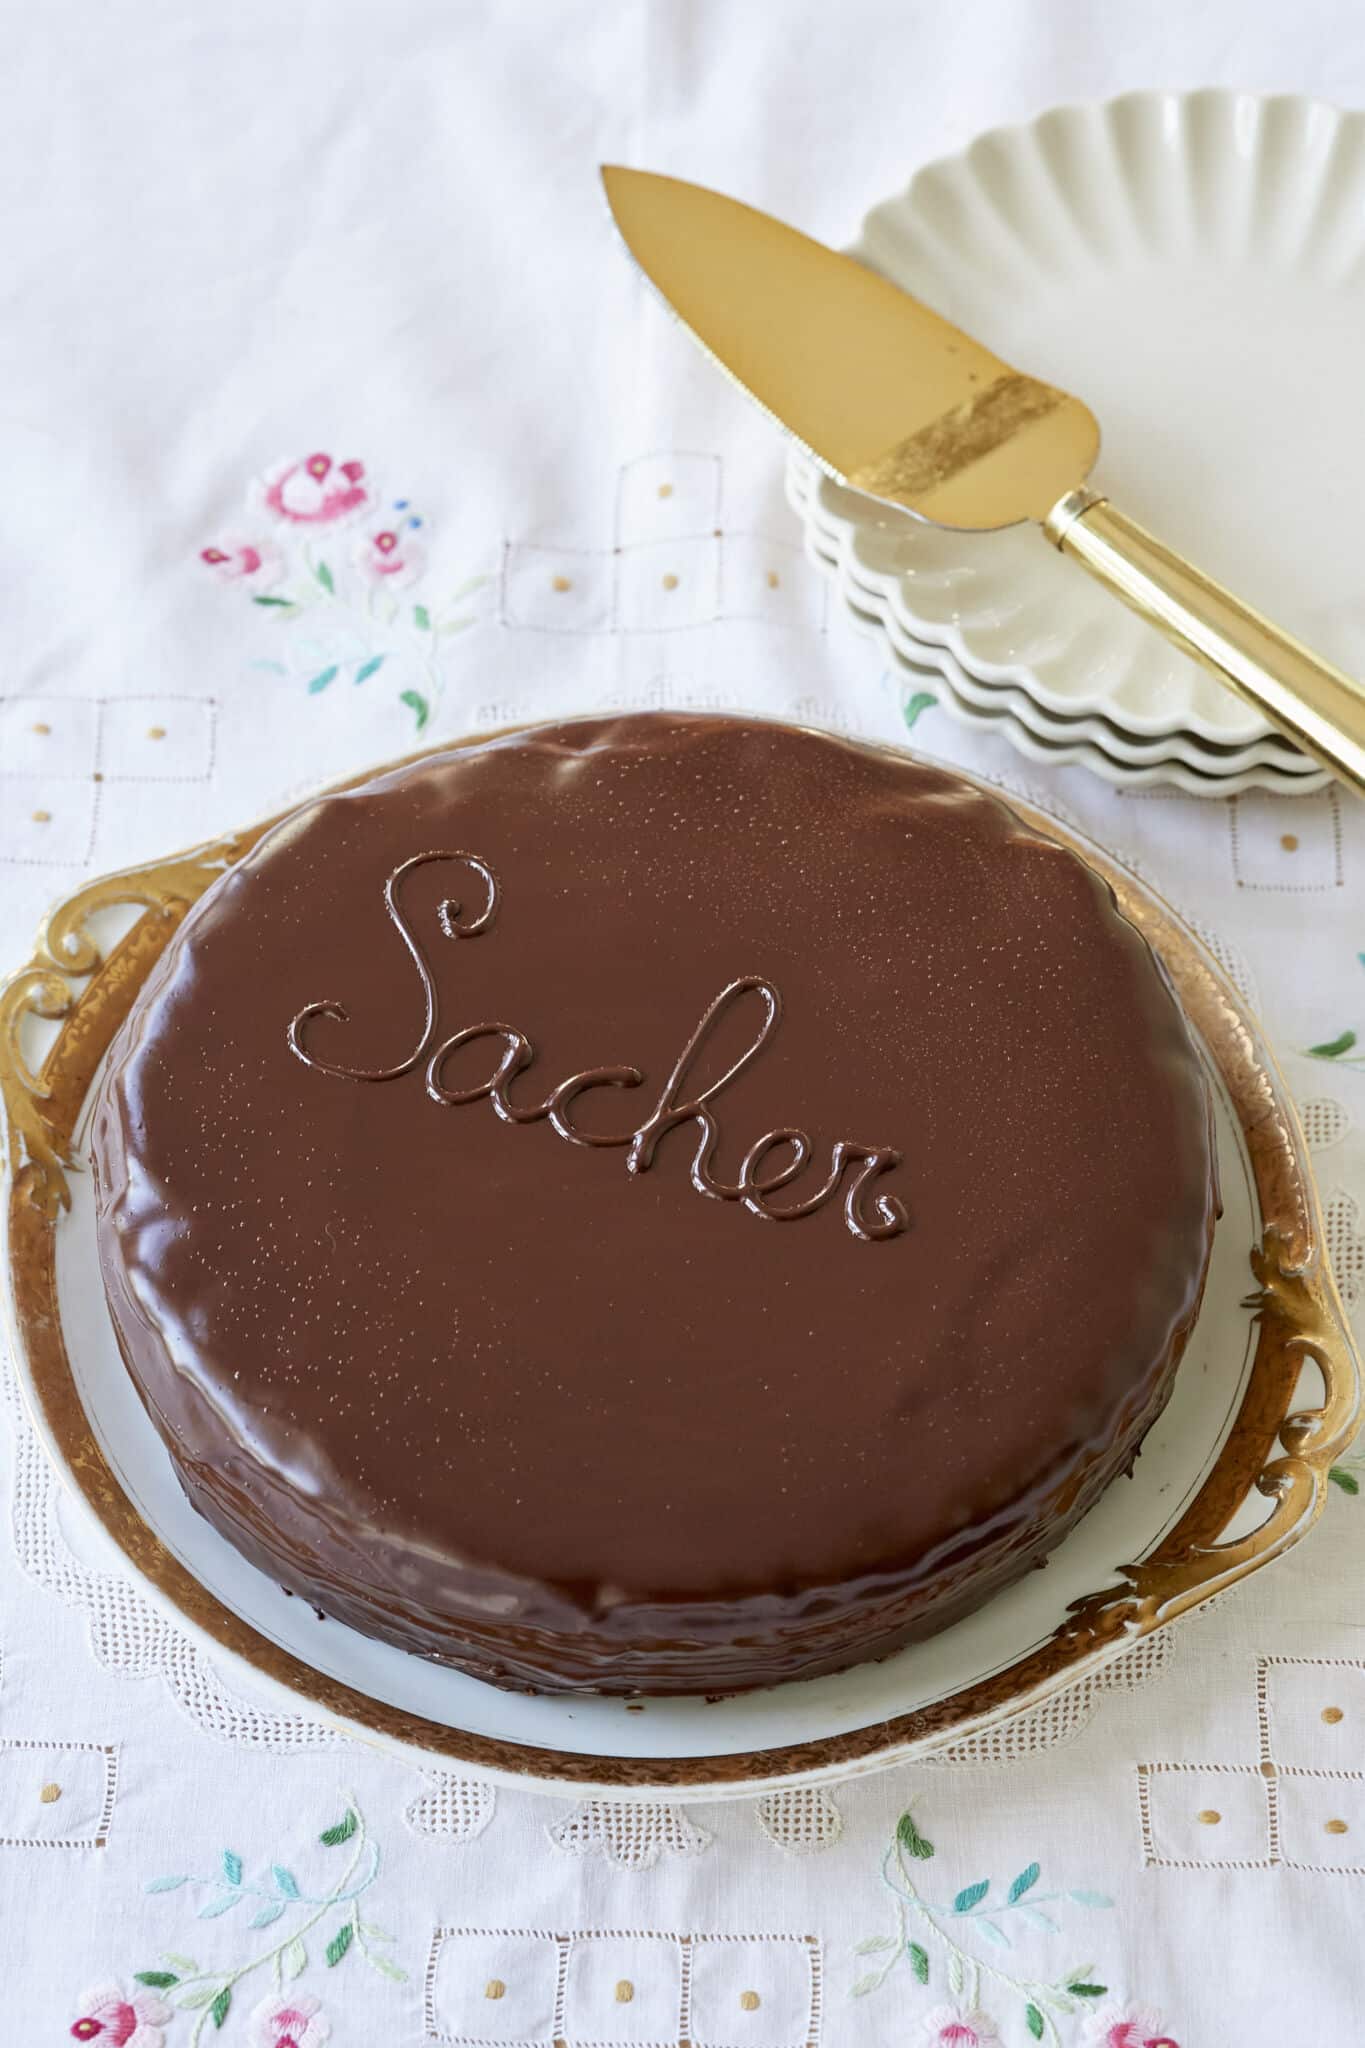 Classic Austrian Sacher Torte is placed on a round golden rim platter. It shows the silky smooth, shinny glaze. 